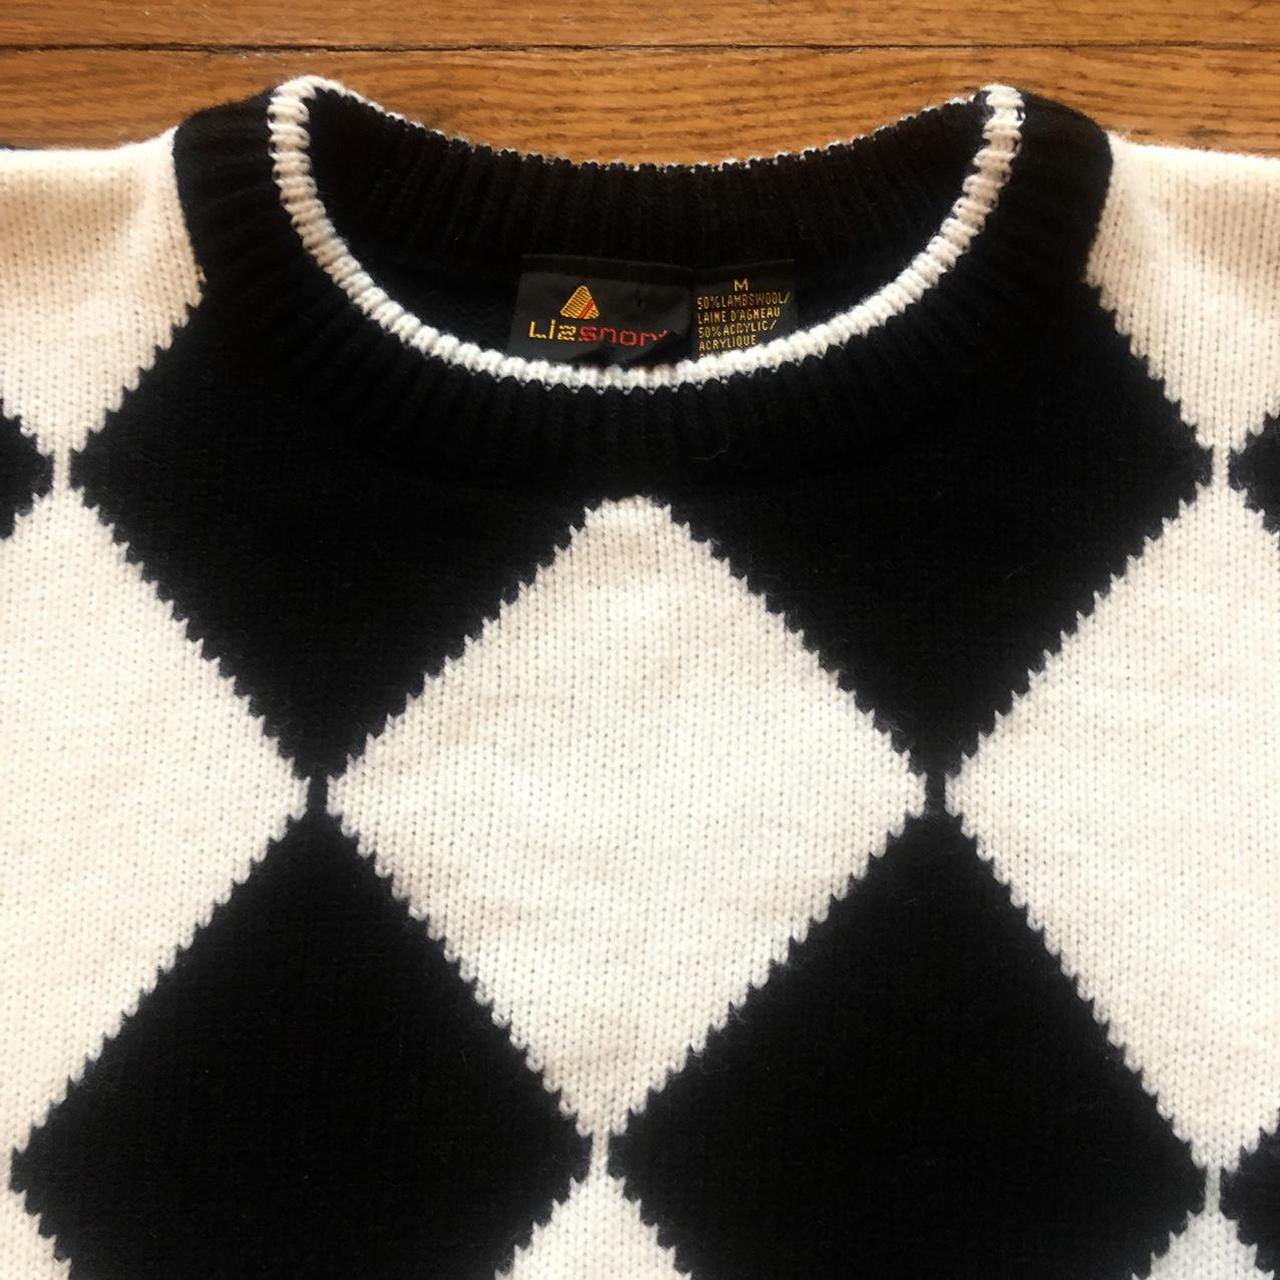 Product Image 2 - Black-and-white vintage checkerboard sweater from